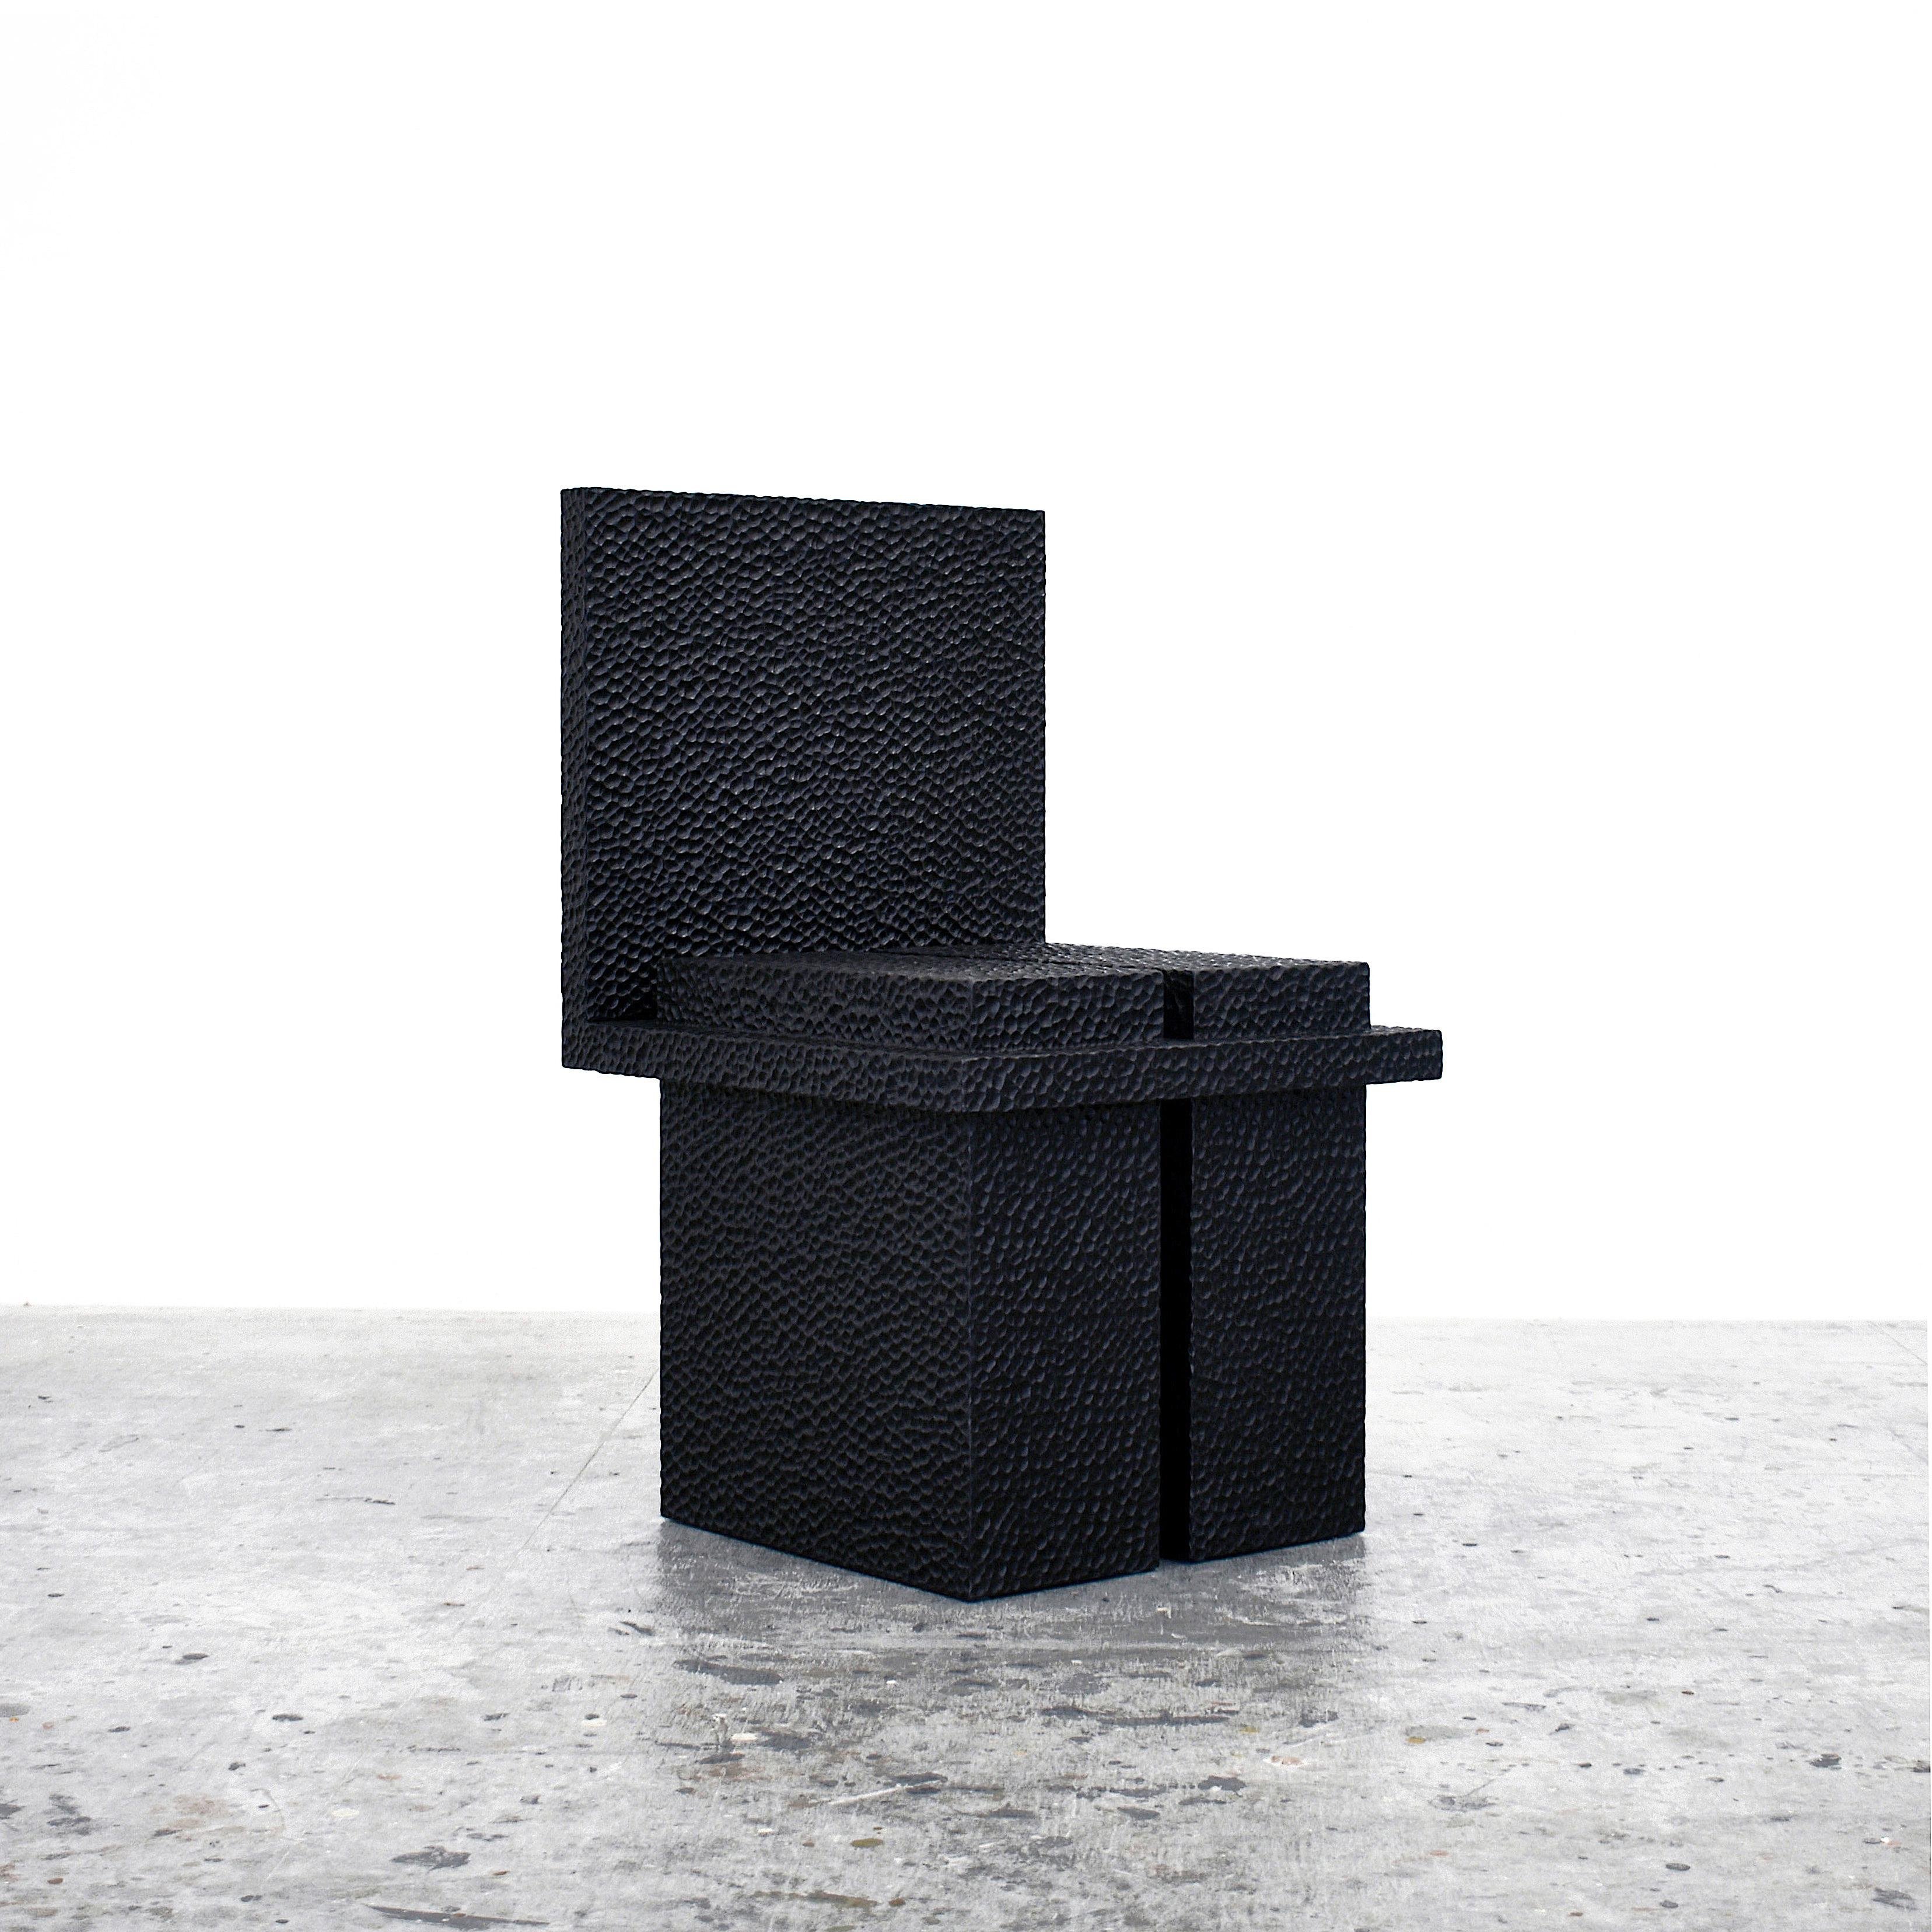 C2 chair by John Eric Byers.
Dimensions: 49.5 x 45.8 x 77.5 cm
Materials: carved blackened maple

All works are individually handmade to order.

John Eric Byers creates geometrically inspired pieces that are minimal, emotional, and modernly